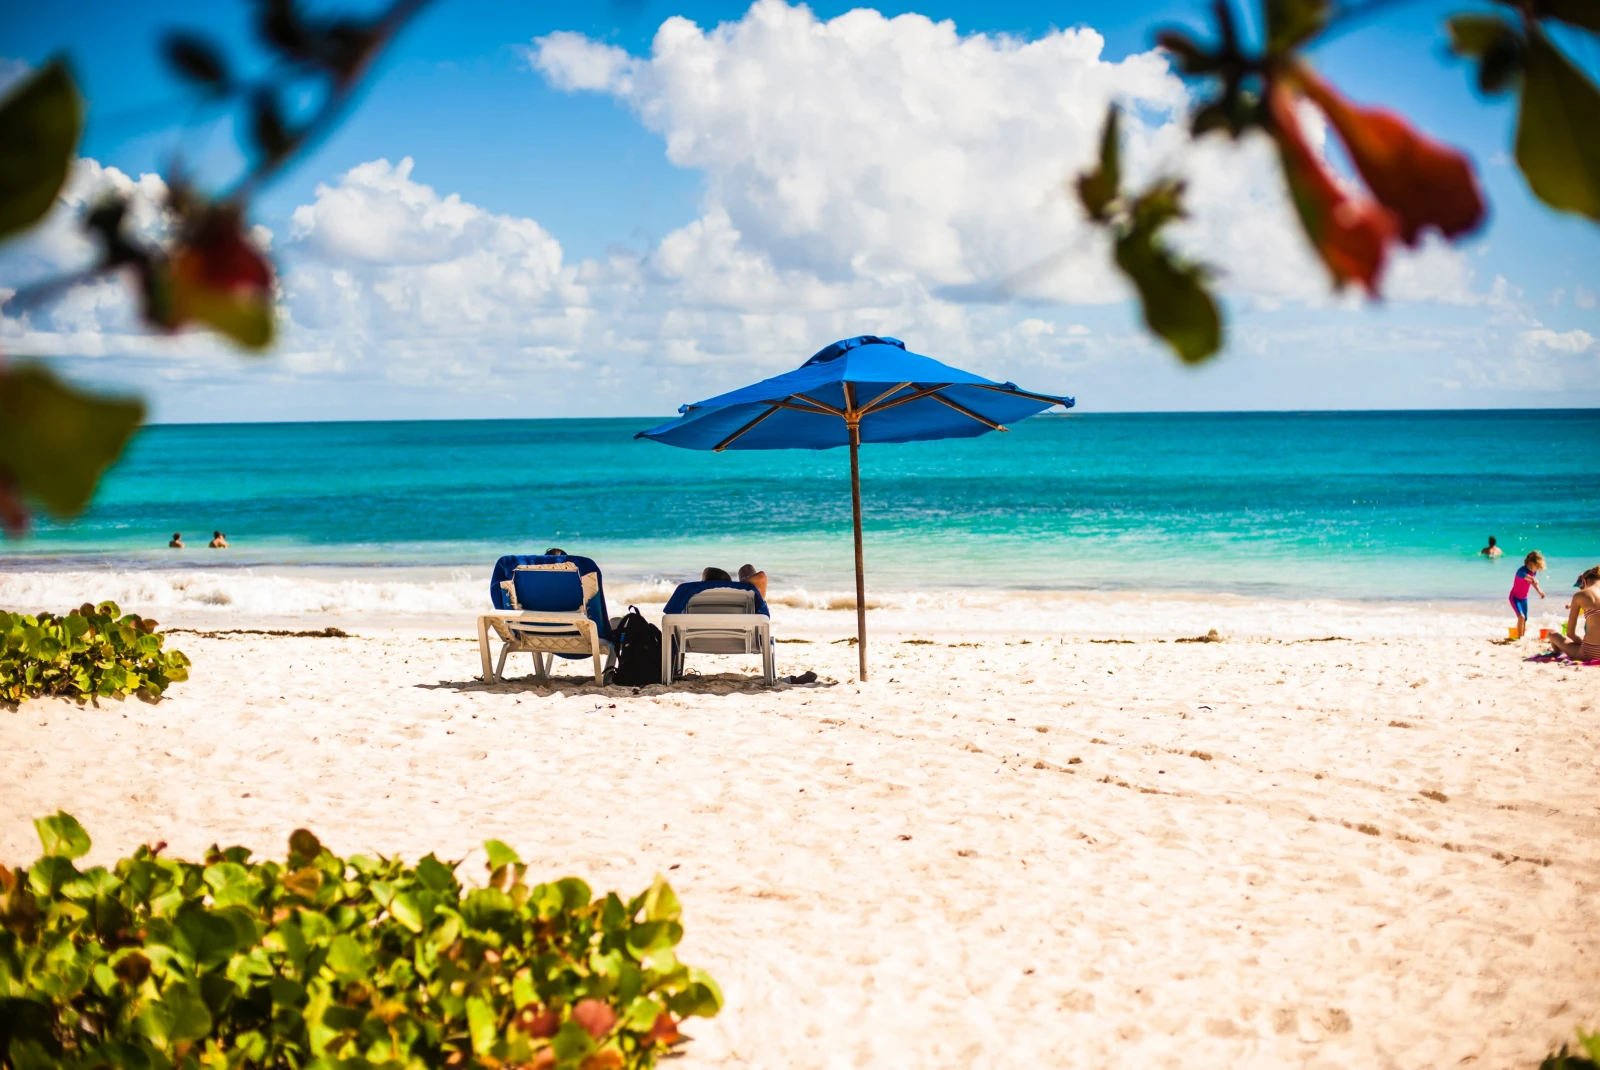 two beach chairs and an umbrella on white sand during daytime